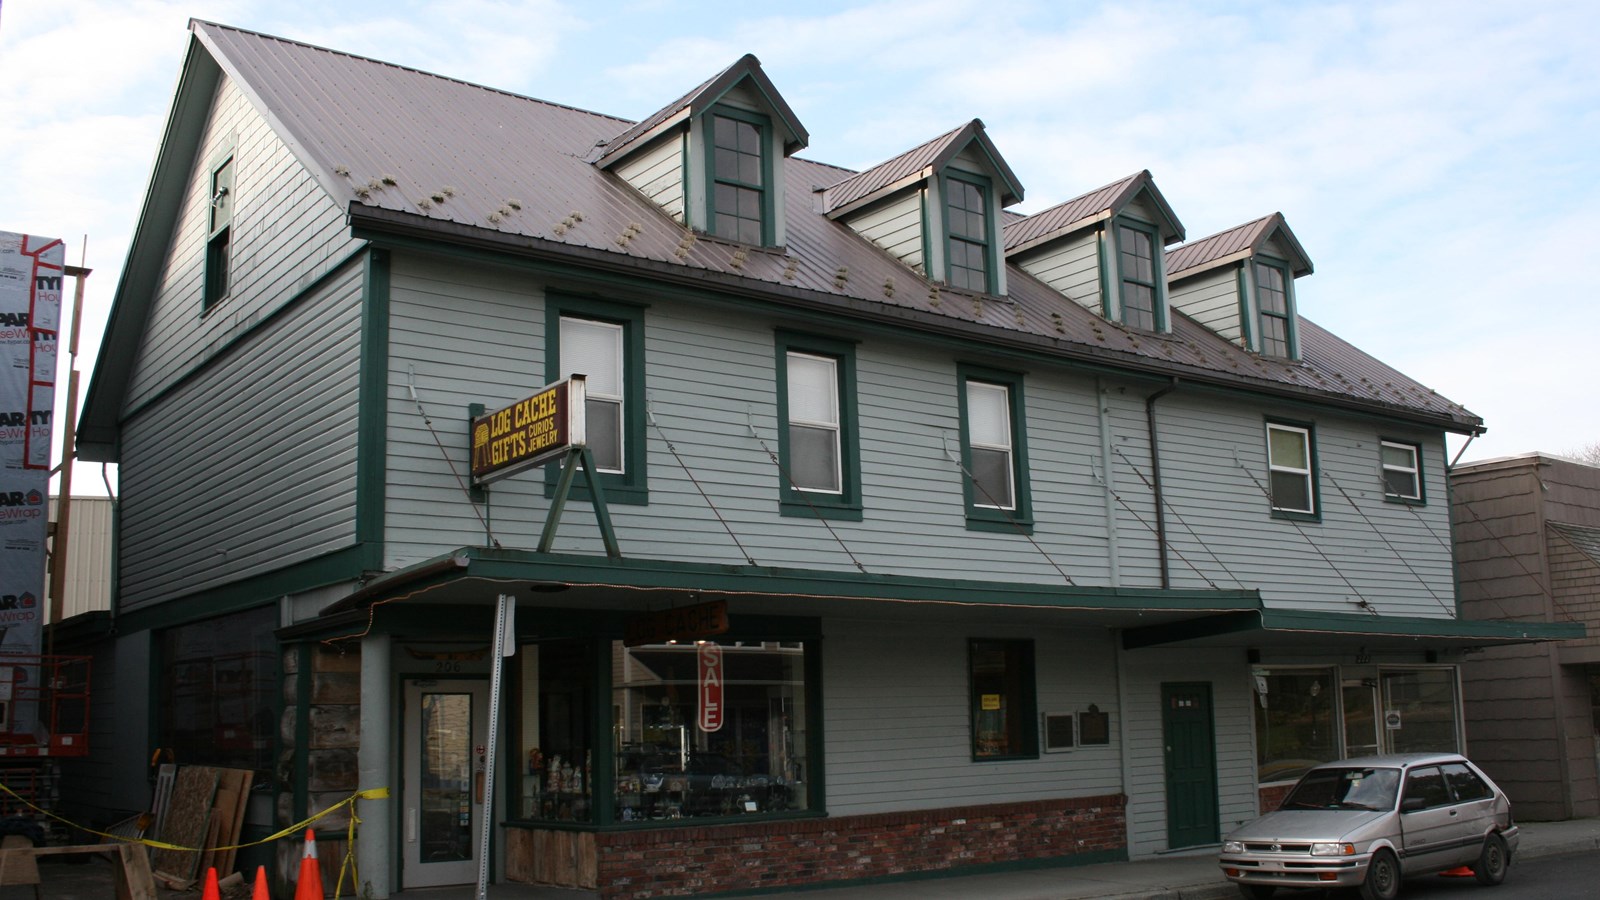 A two story gray building with green trim, gable roof, and four dormer windows.